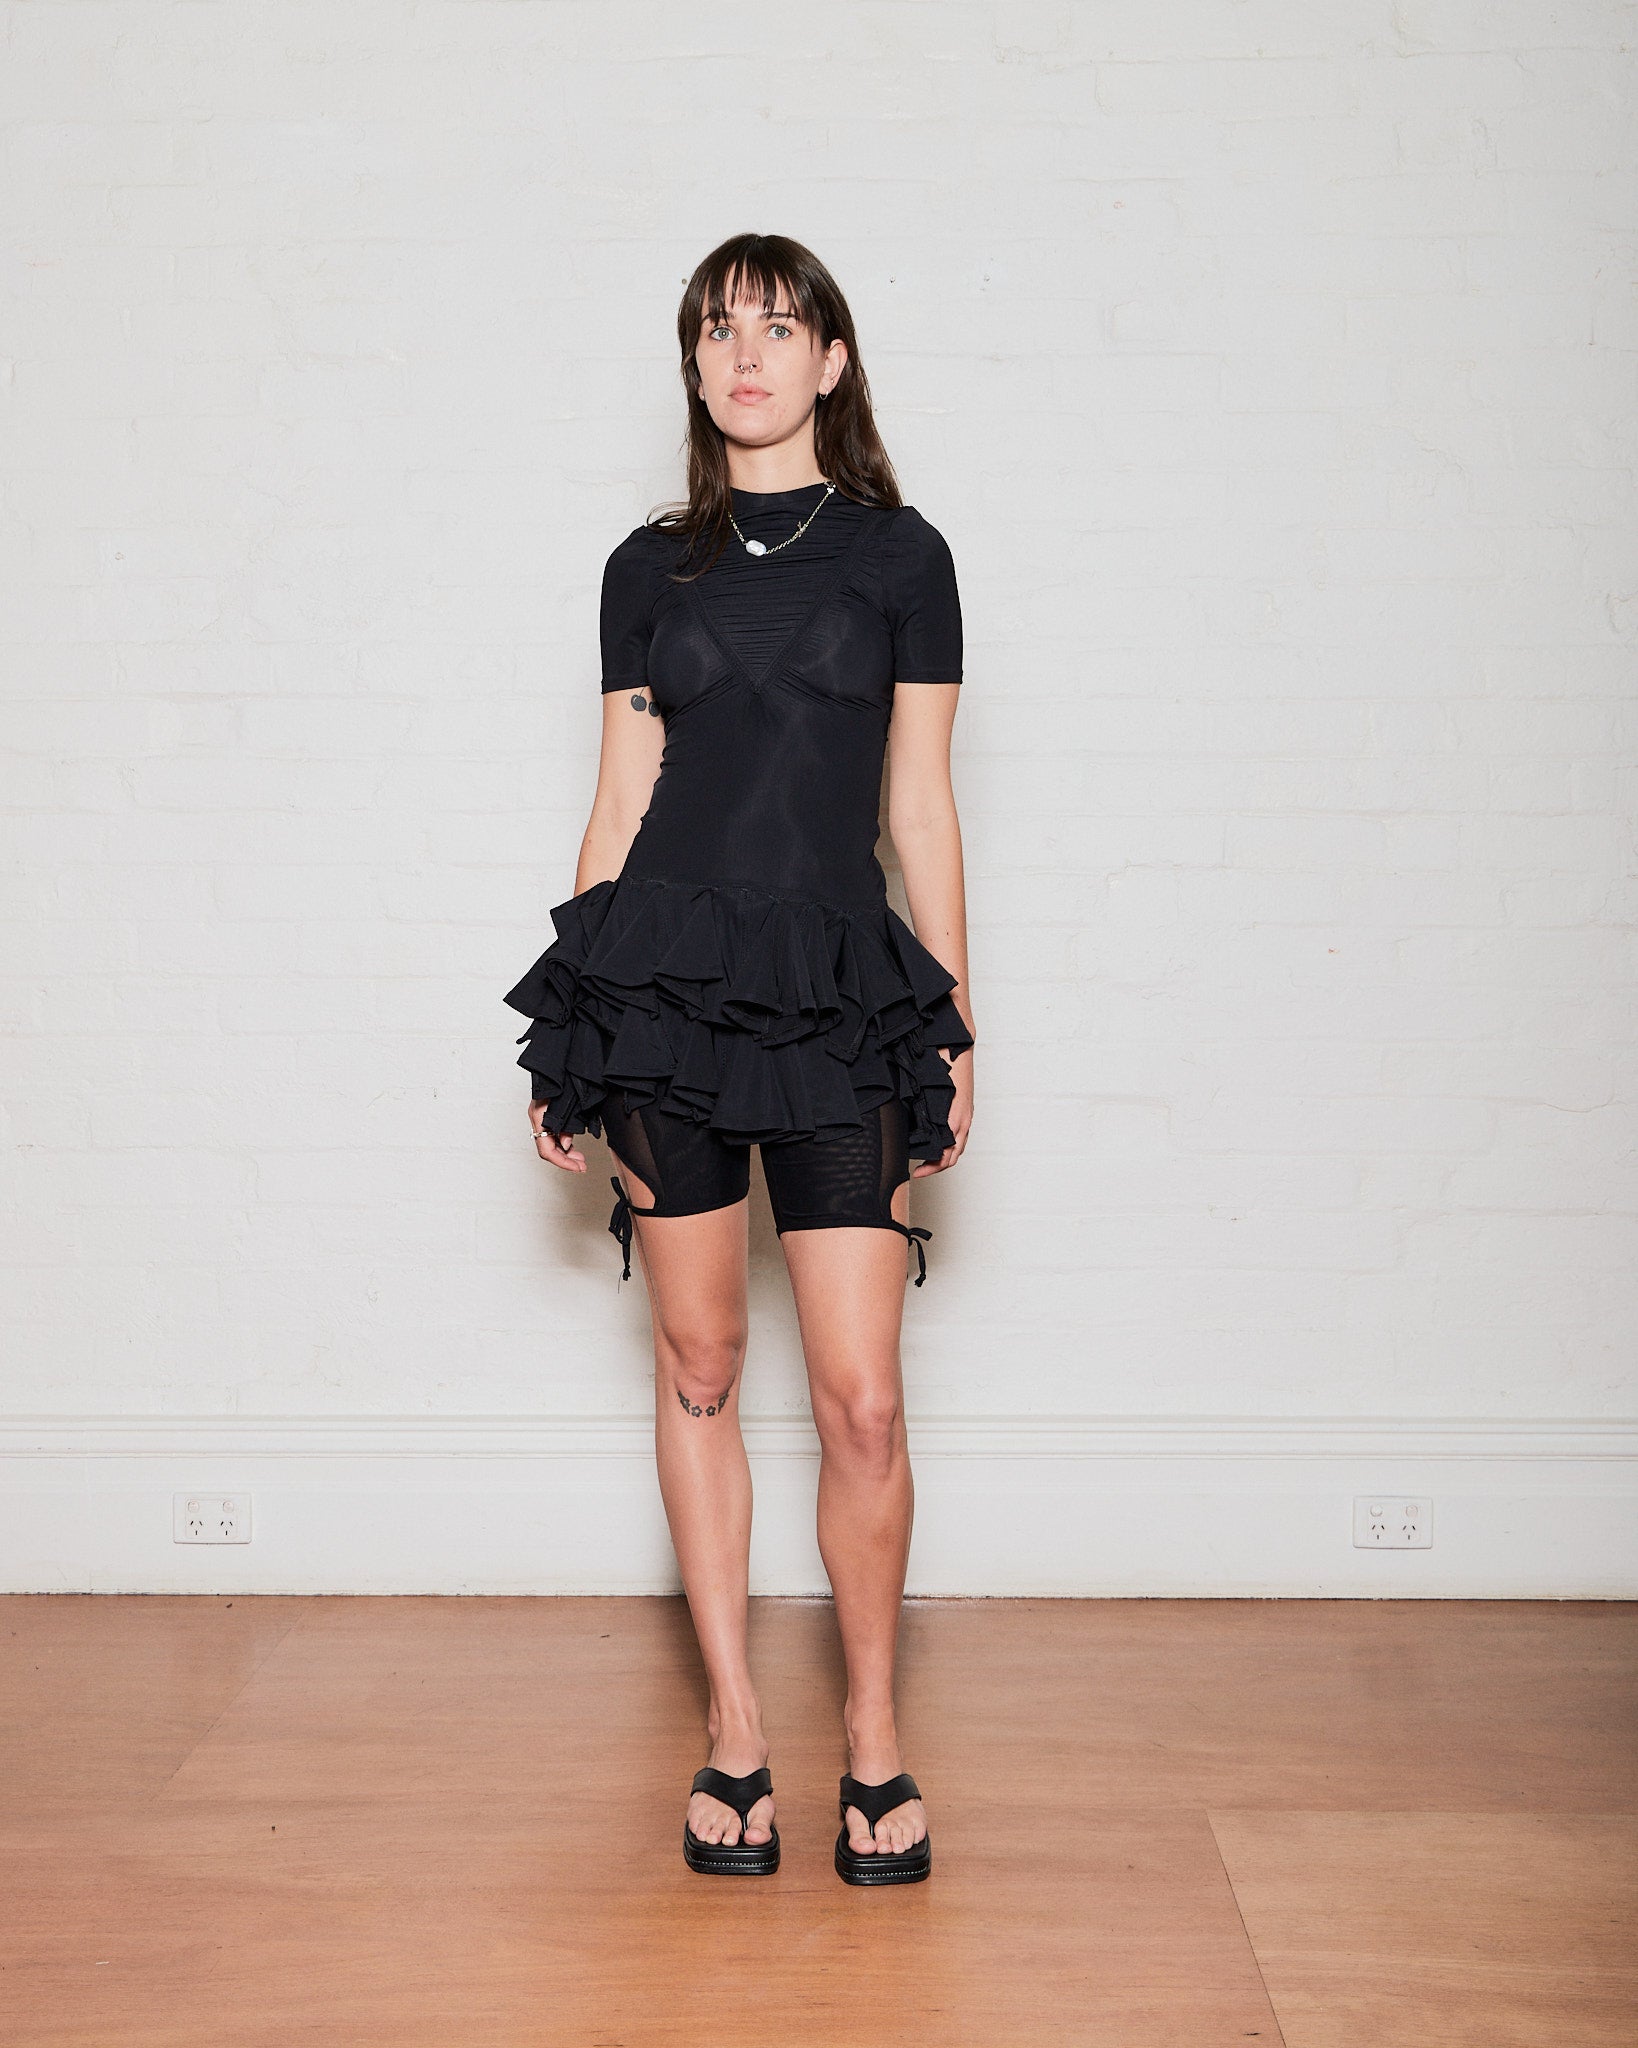 Black fitted tutu dress with short sleeves and ruffles at hem. Made by Australian independent designer Emily Watson. Sold in Melbourne clothing boutique called Error404store.